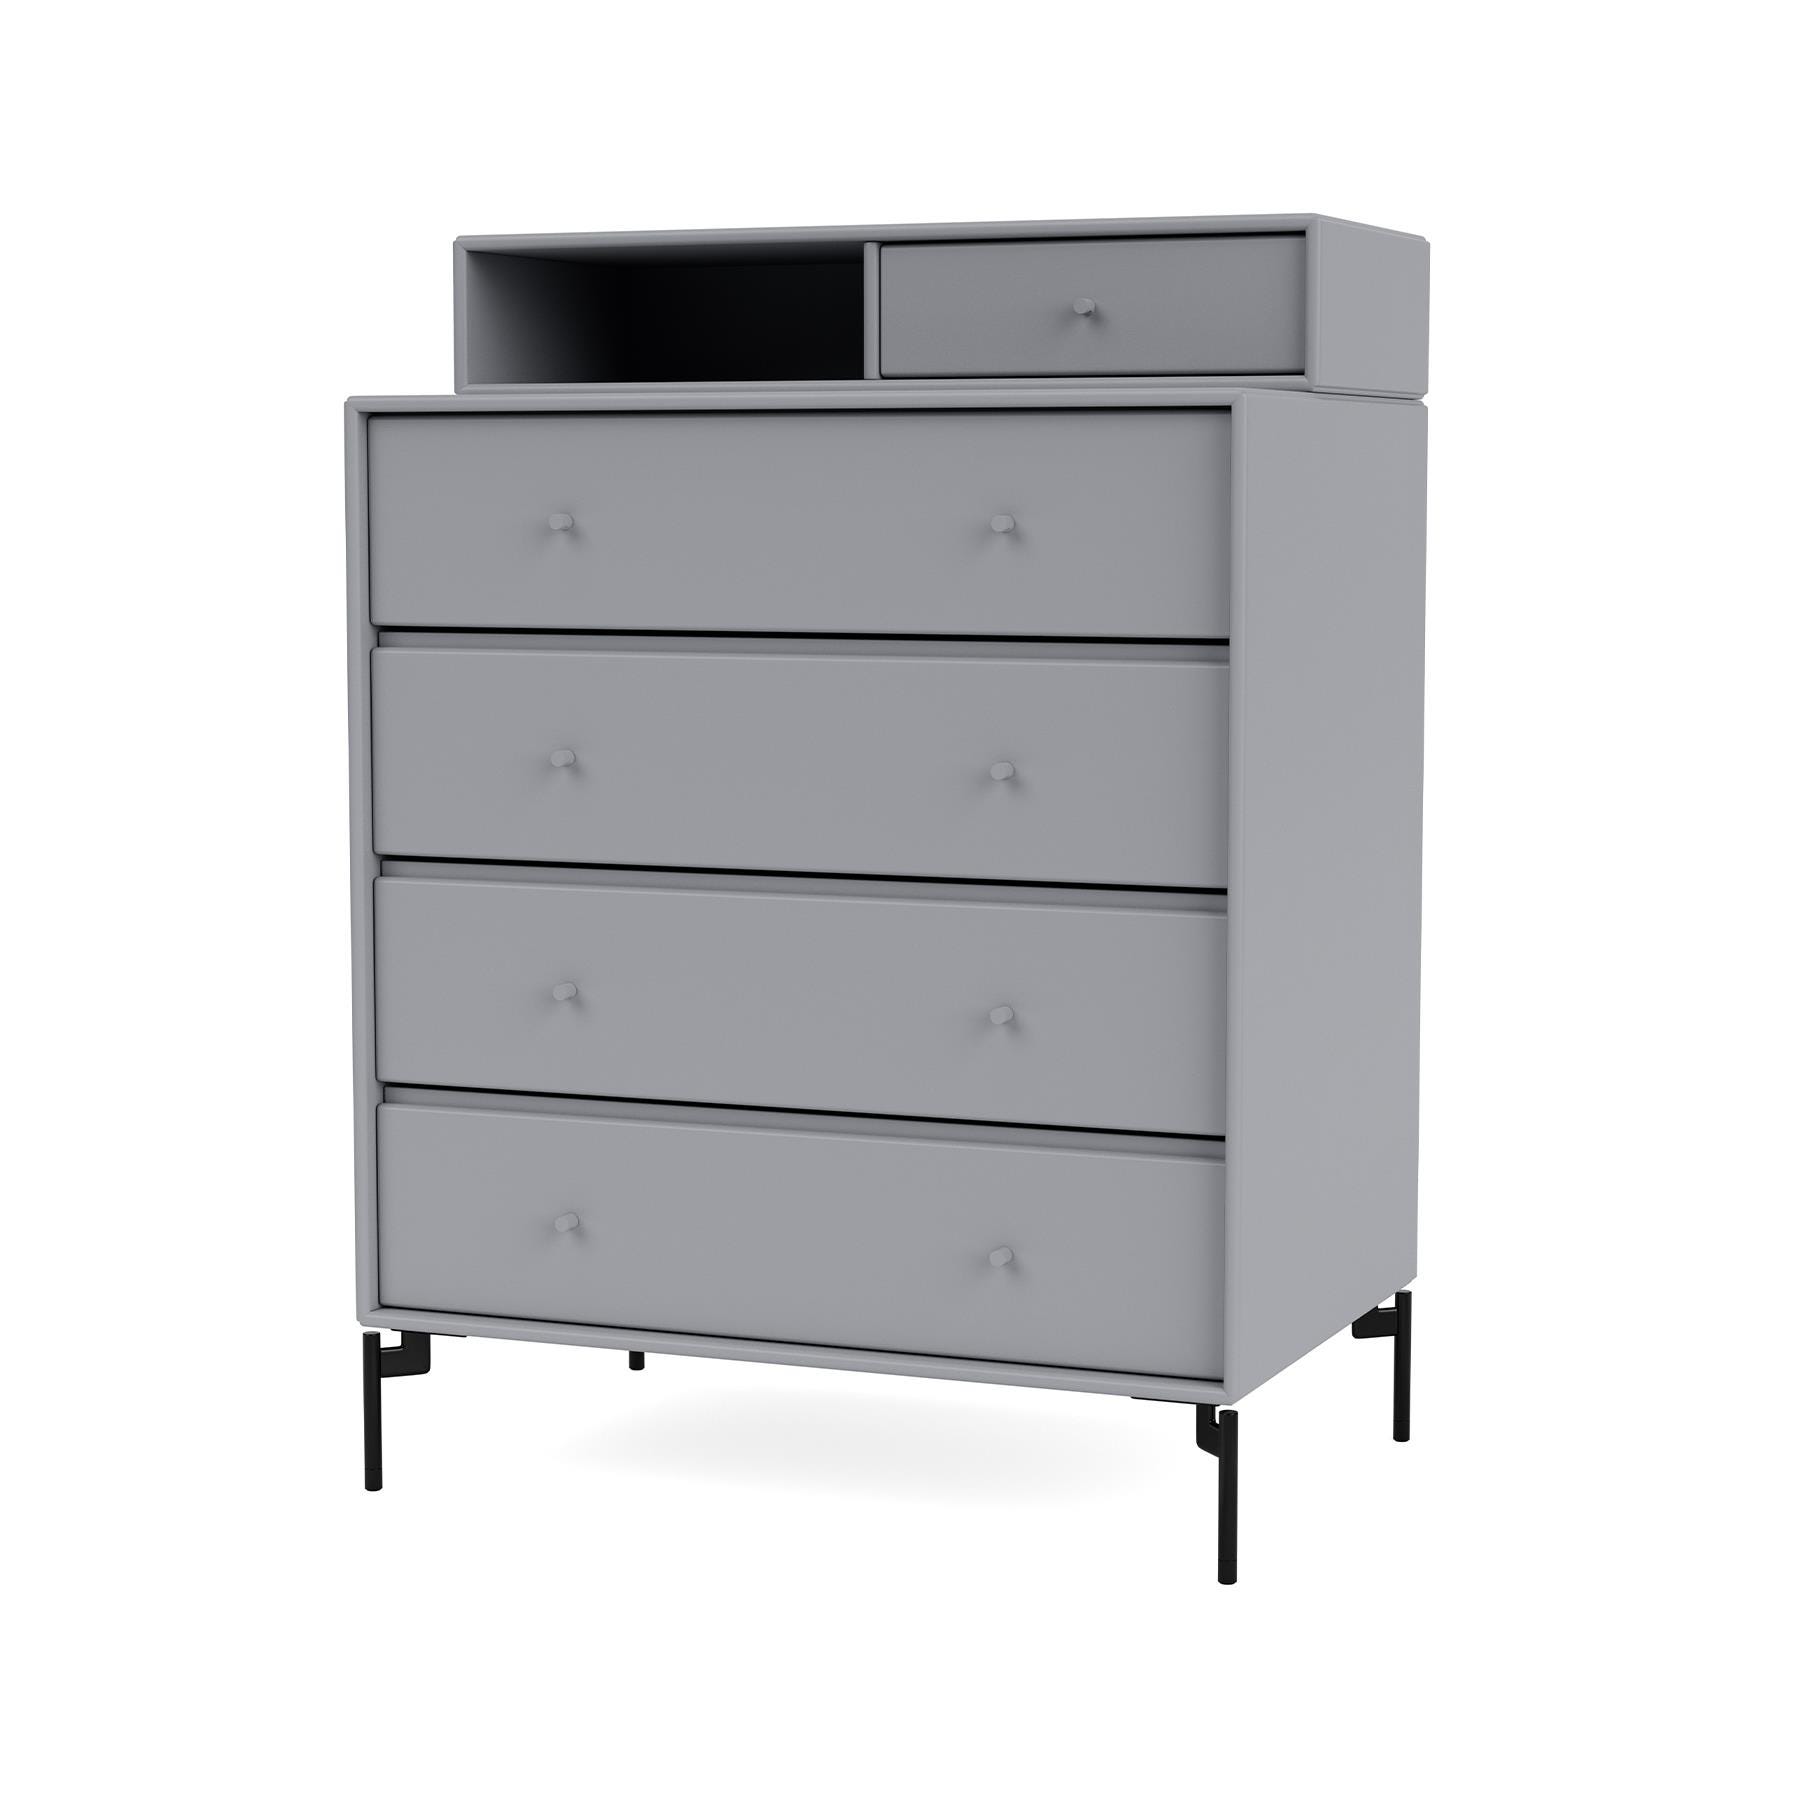 Montana Keep Chest Of Drawers Graphic Black Legs Grey Designer Furniture From Holloways Of Ludlow